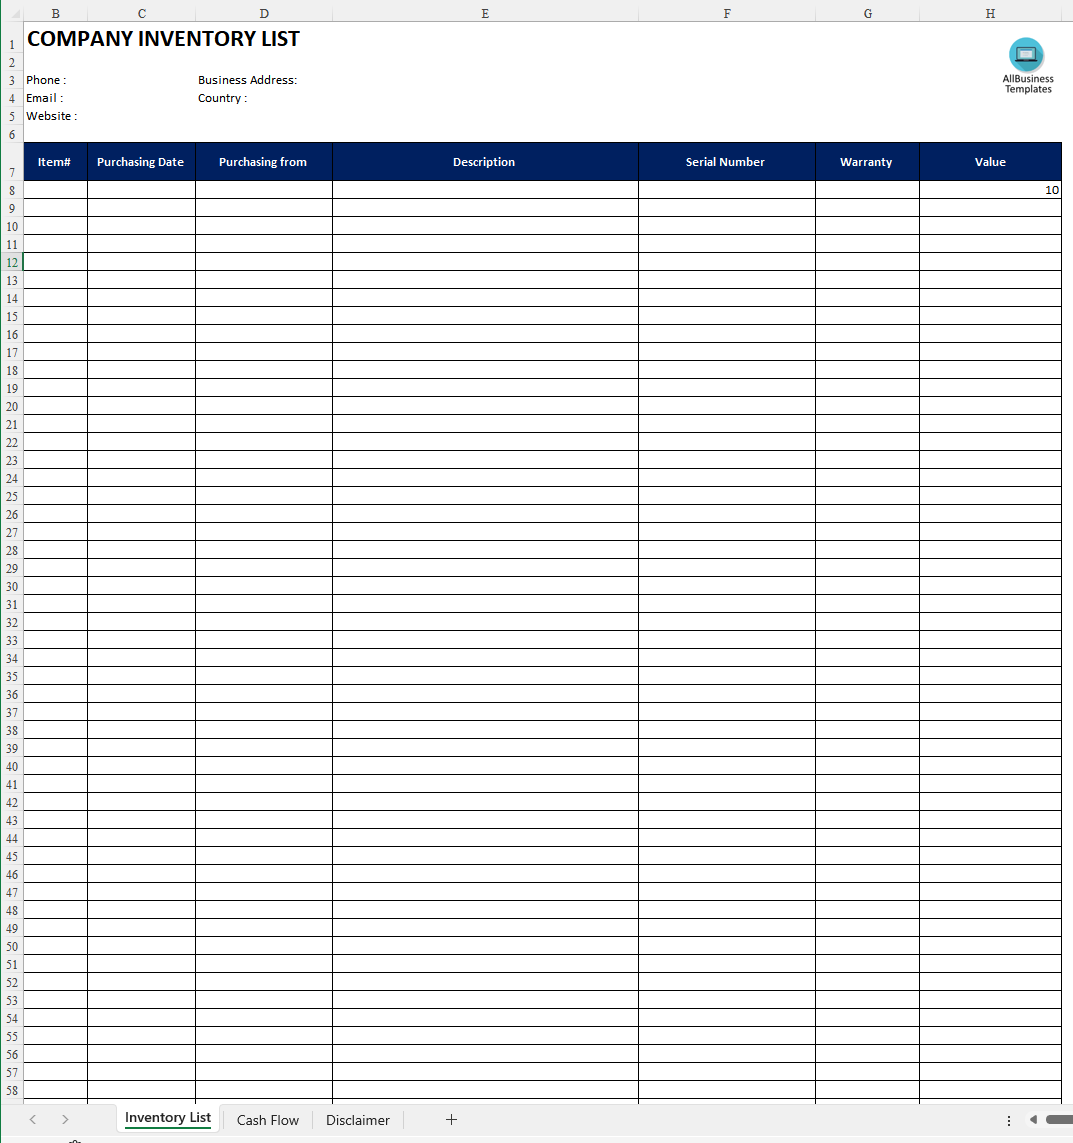 Printable Business Inventory List main image